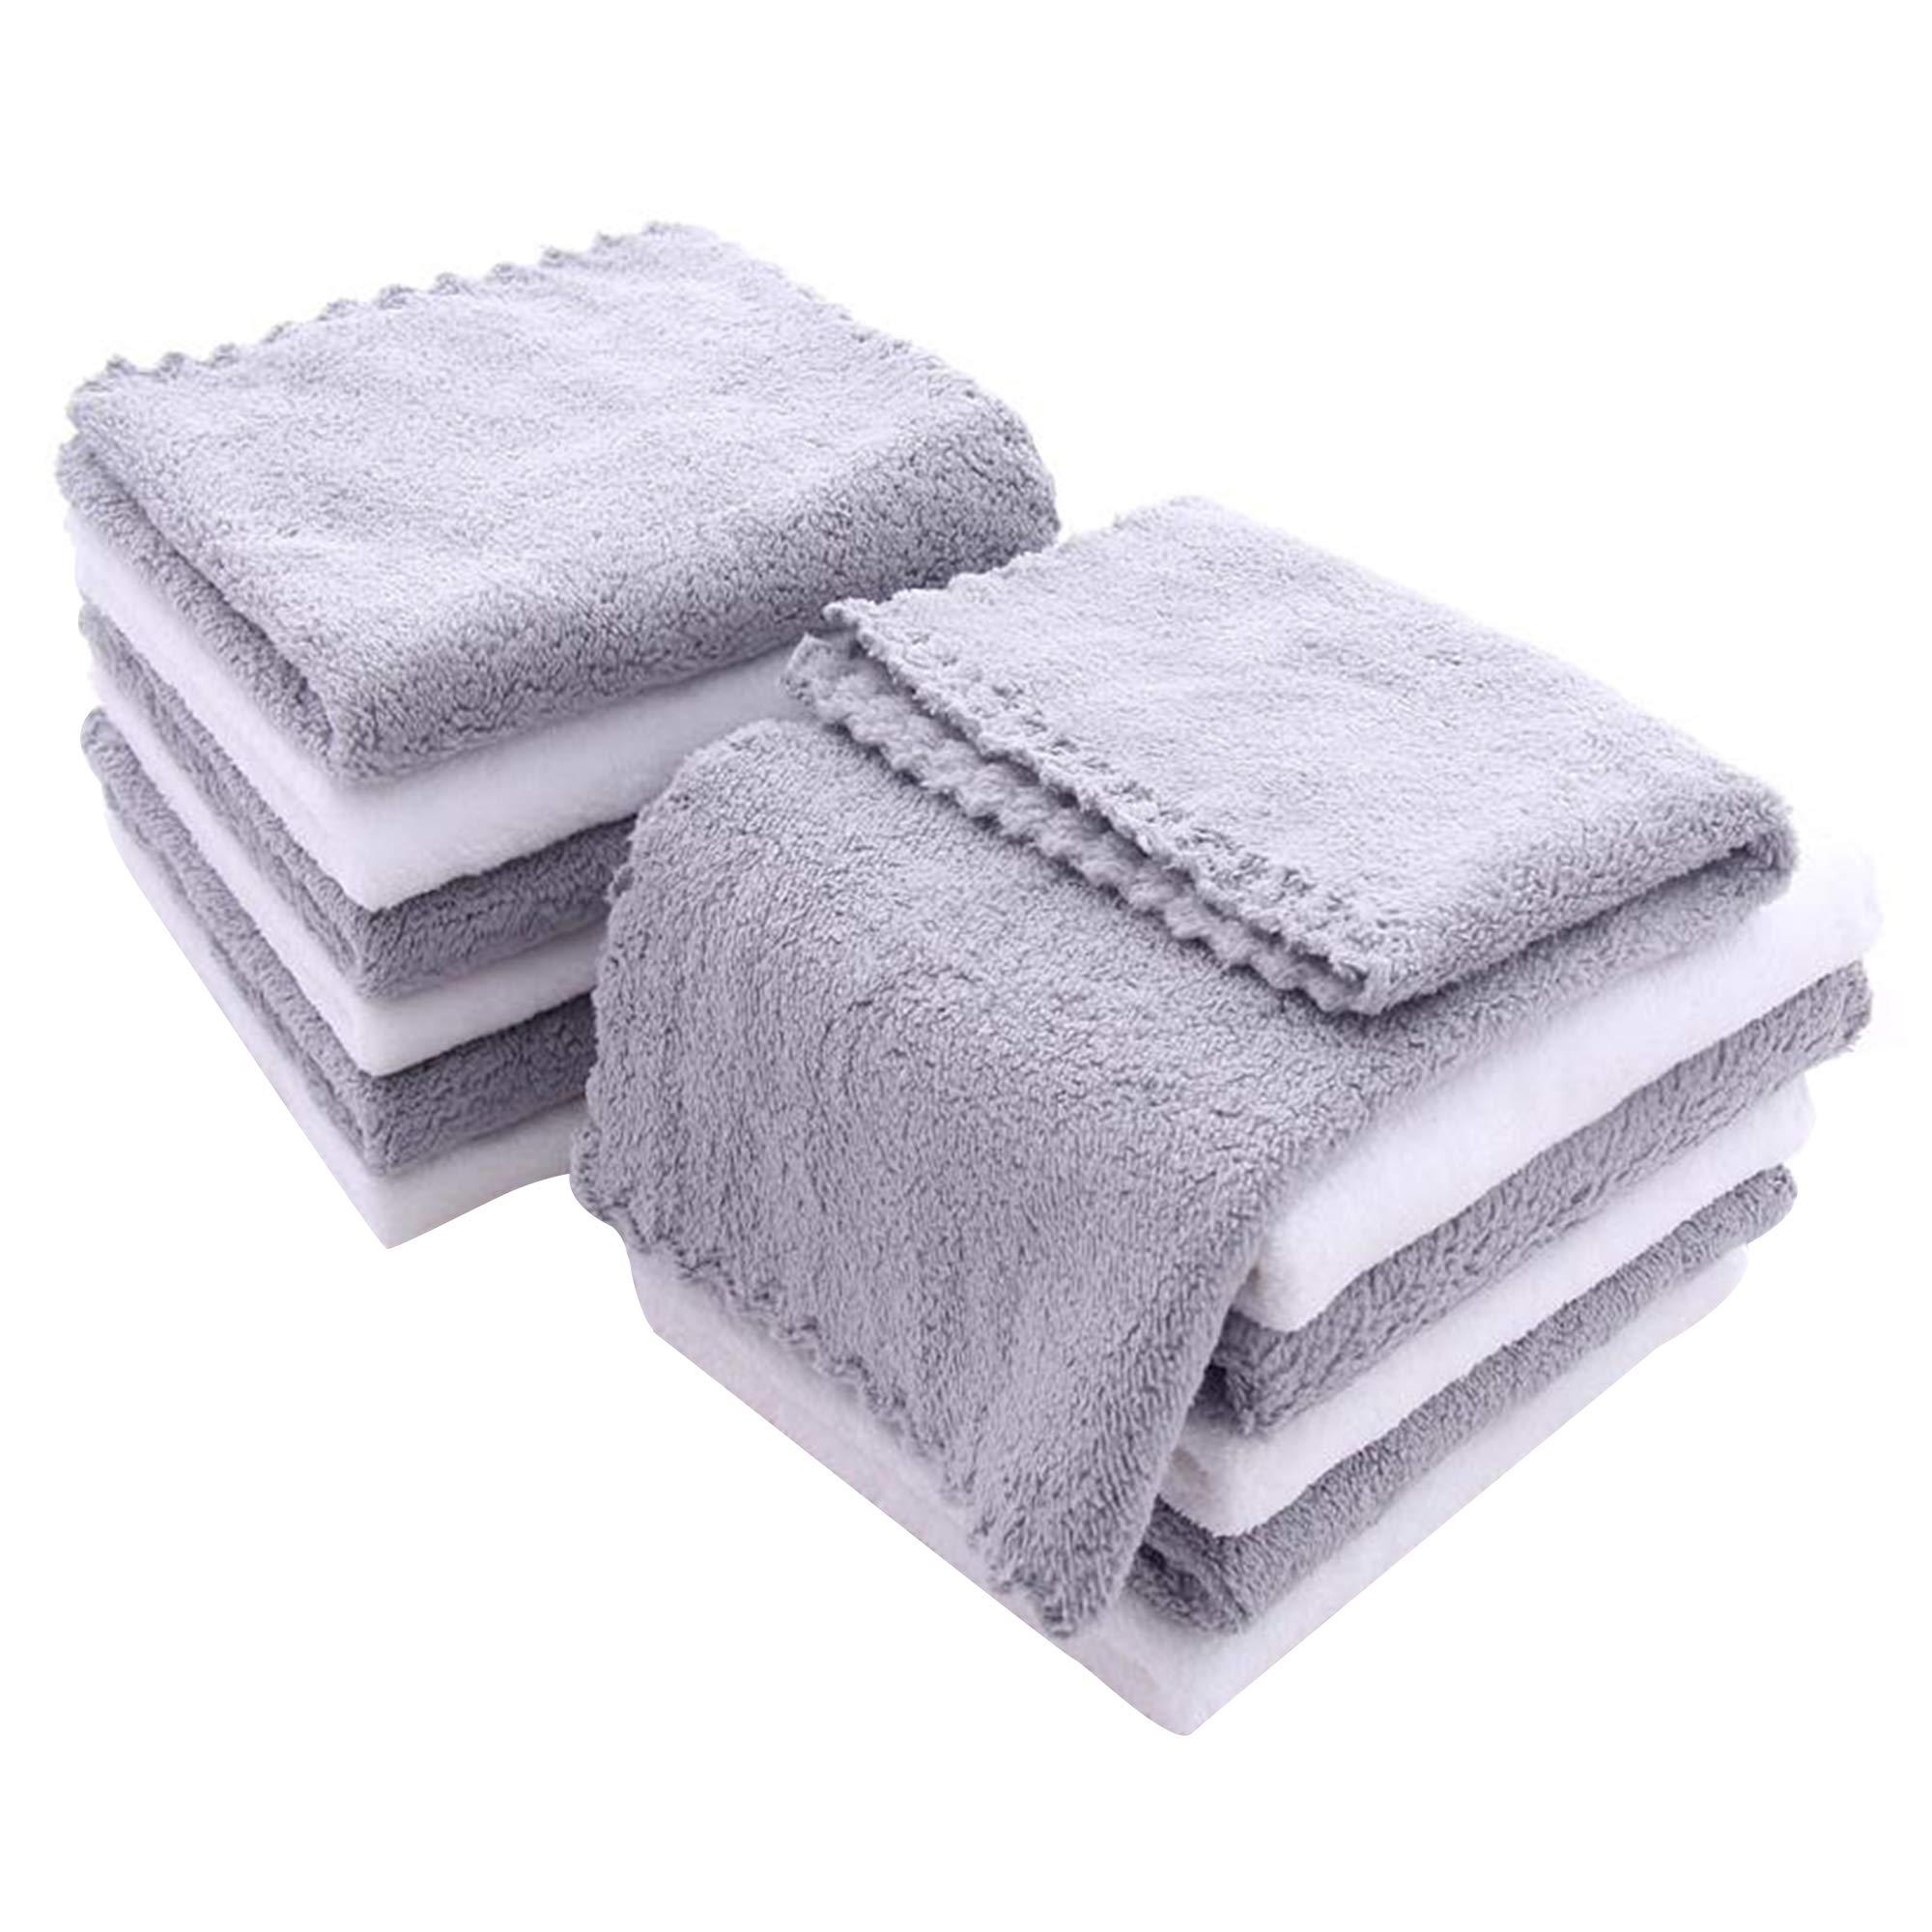 12 Pack Baby Washcloths - Extra Absorbent and Soft Wash Clothes for  Newborns, Infants and Toddlers - Suitable for Baby Skin and New Born -  Microfiber Coral Fleece 12x12 Inches Grey and